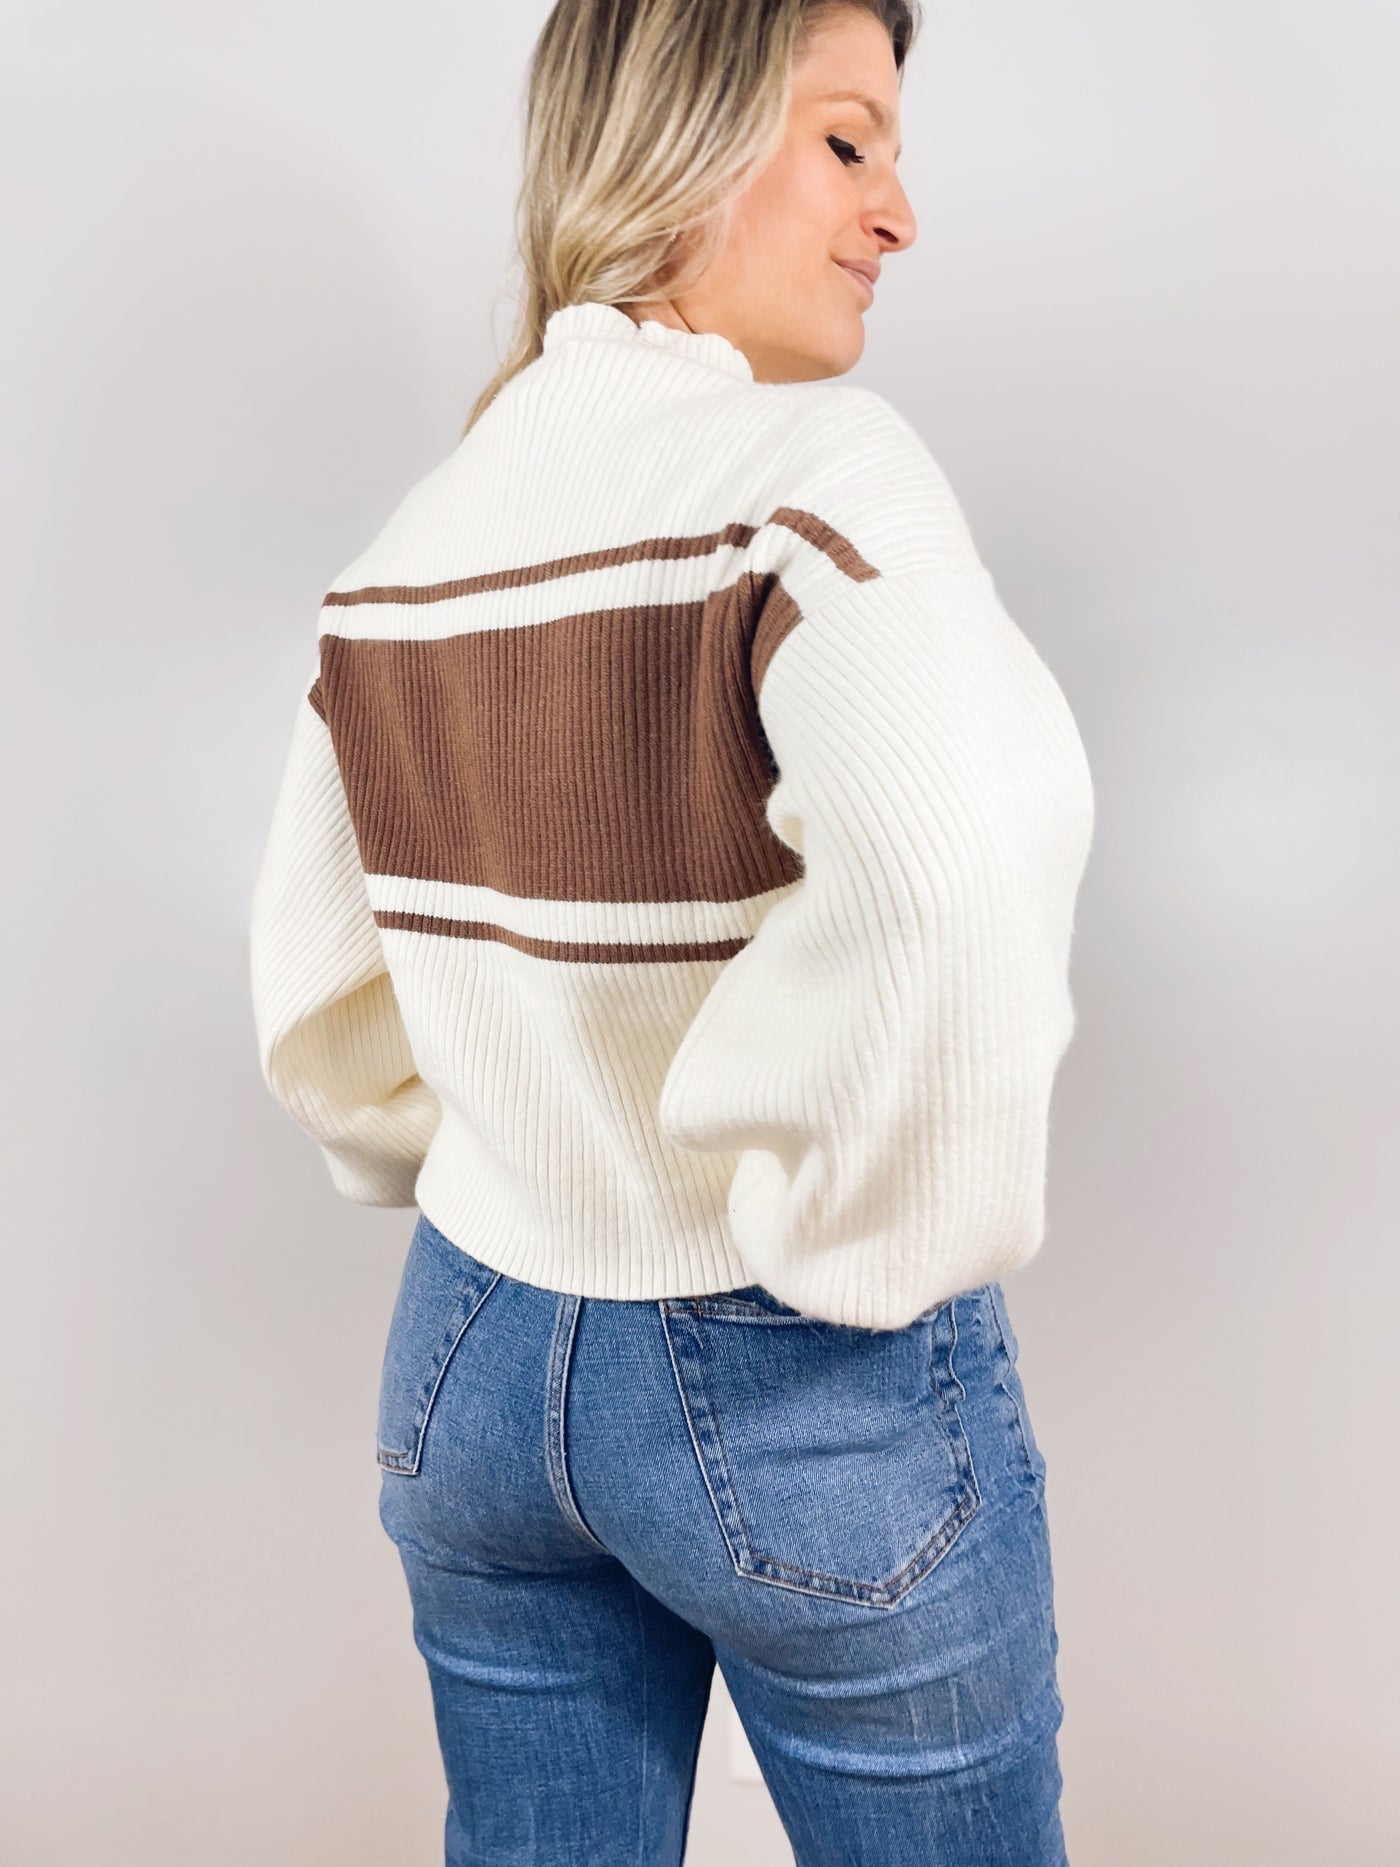 Give them Stripes Brown + Cream Balloon Sleeve Mock Neck Sweater